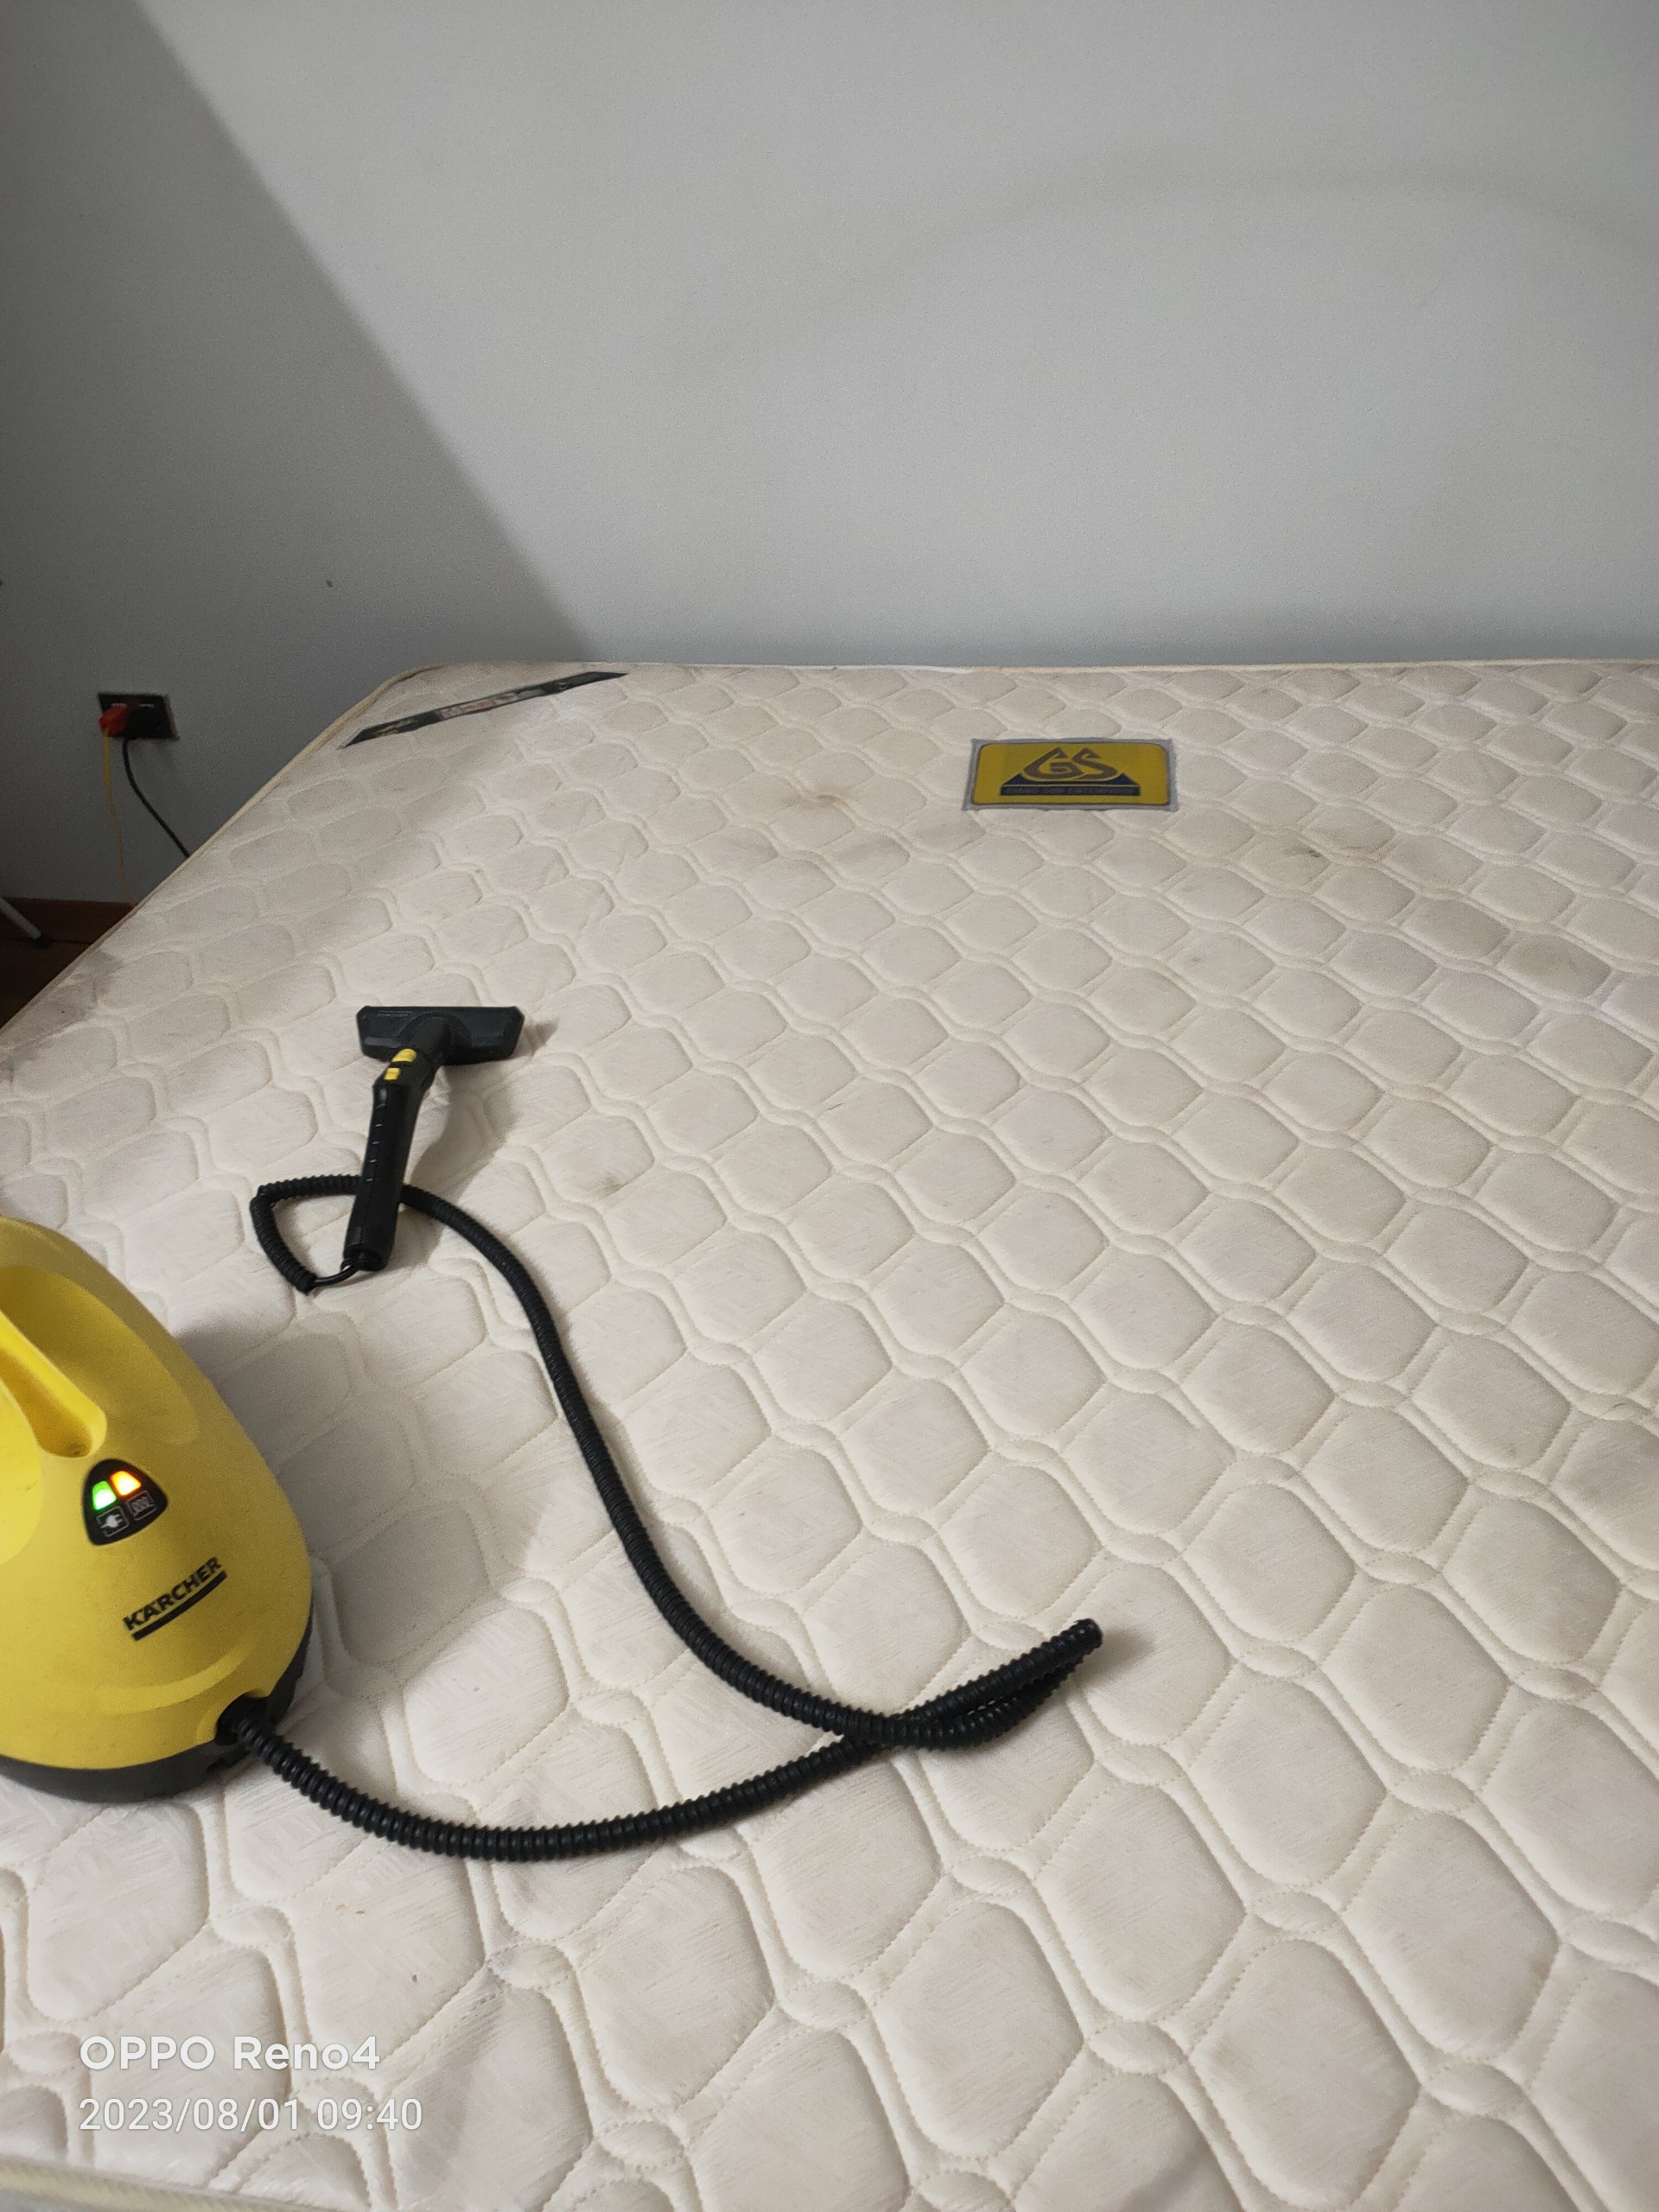 Upholstery steam cleaning - mattress cleaning (mold removal)